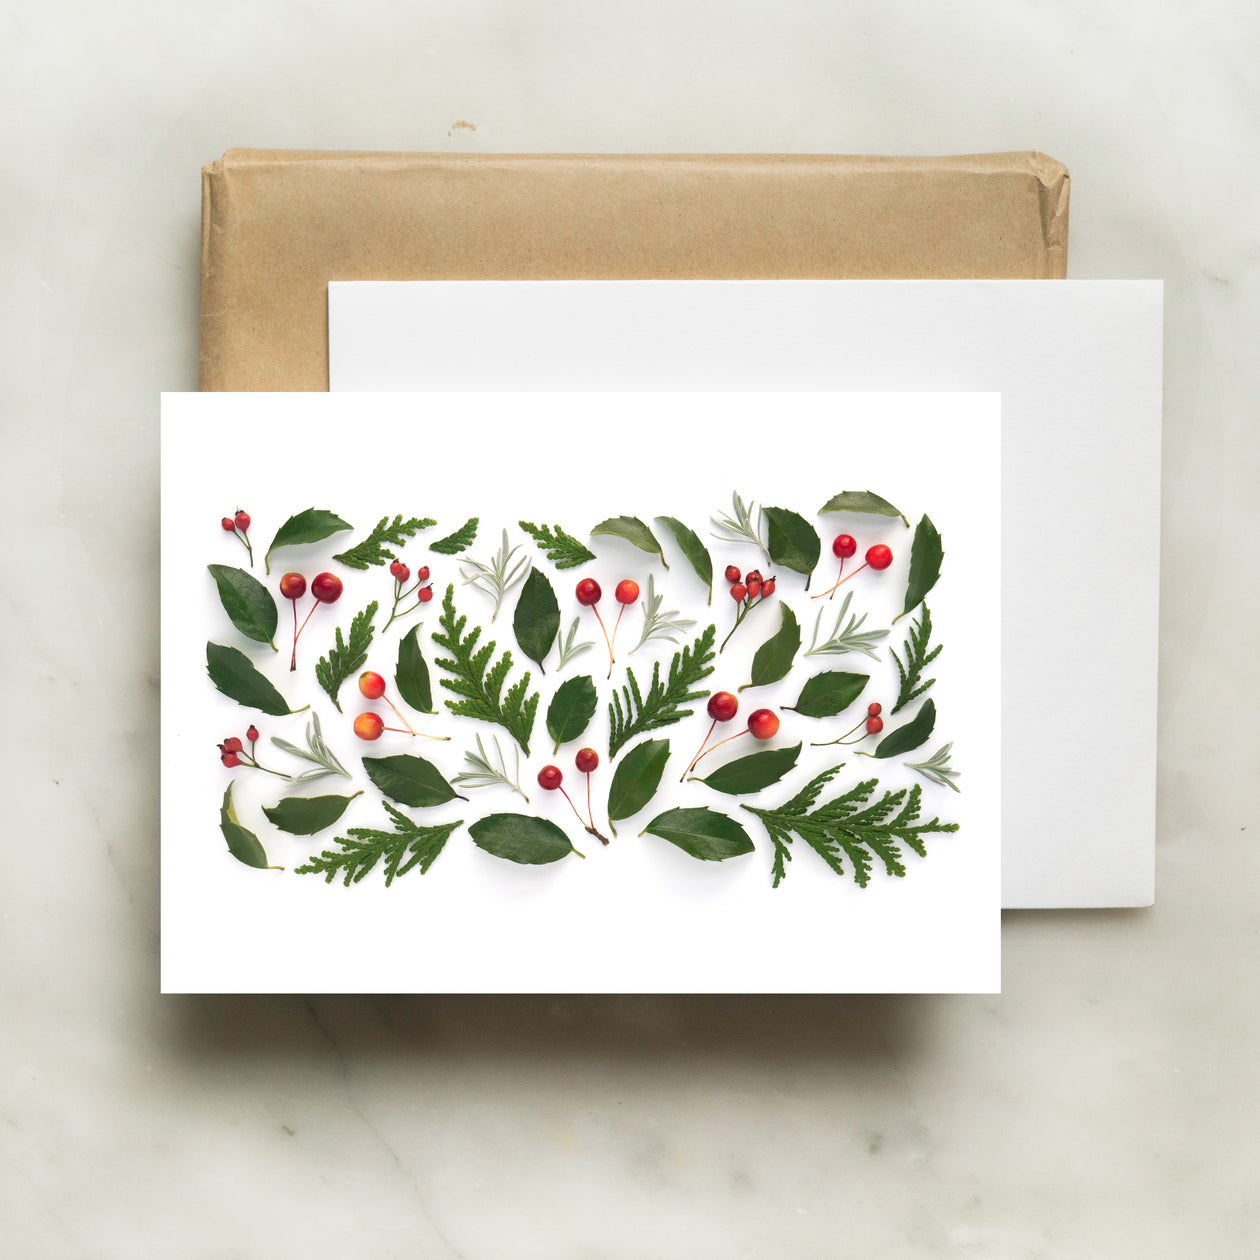 Folding card - Greenery with berries and lavender